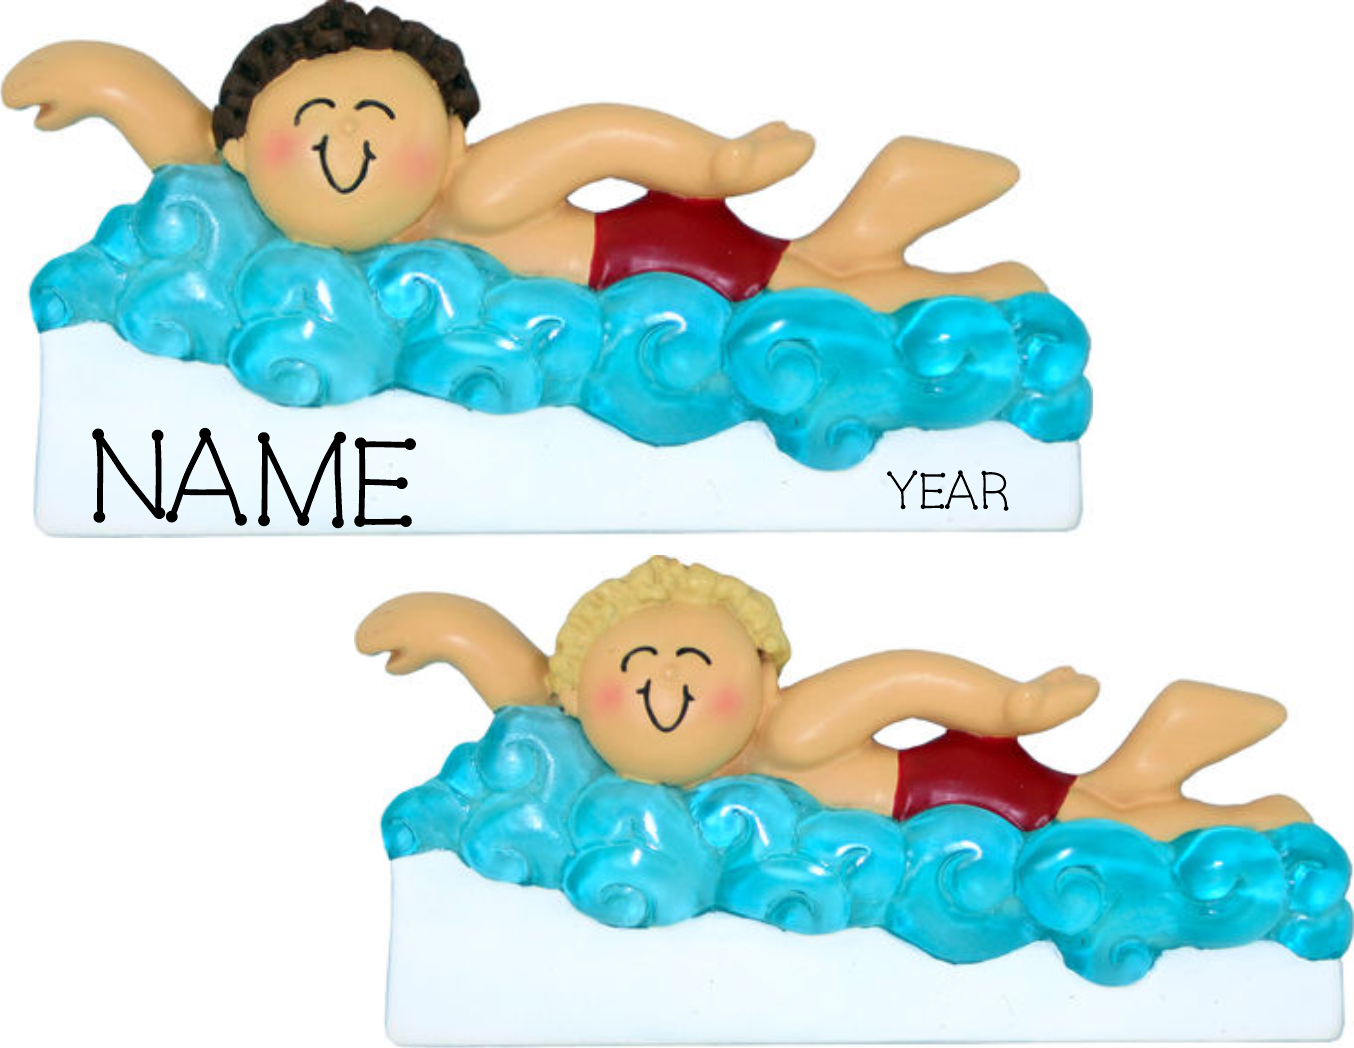 Swimmer in pool, Male-Personalized Christmas Ornament